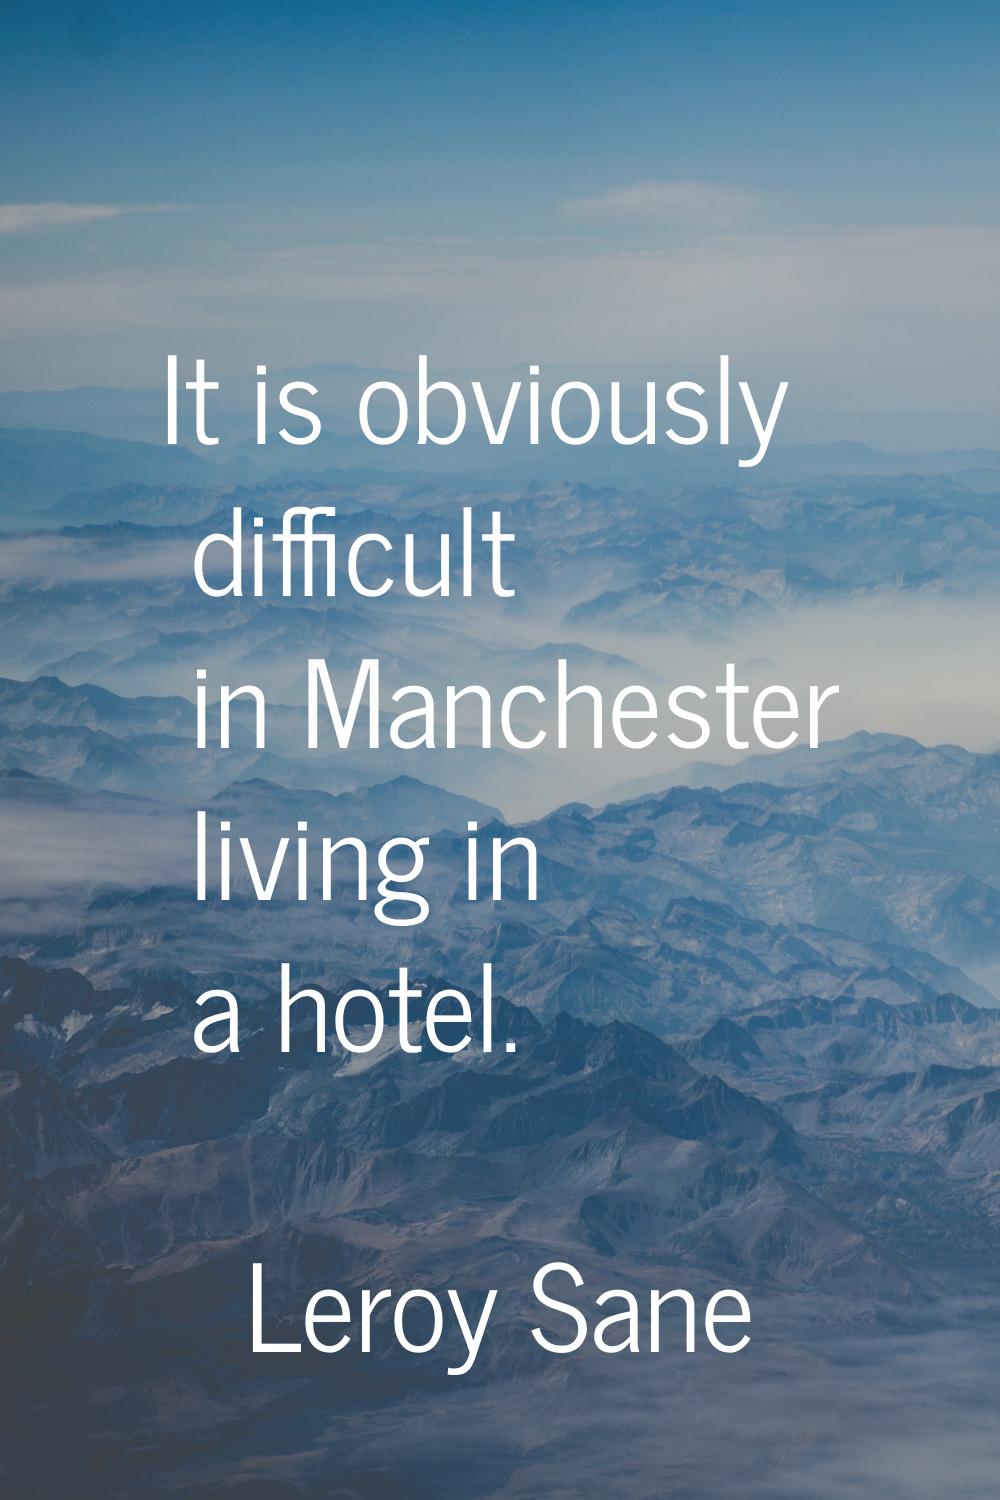 It is obviously difficult in Manchester living in a hotel.